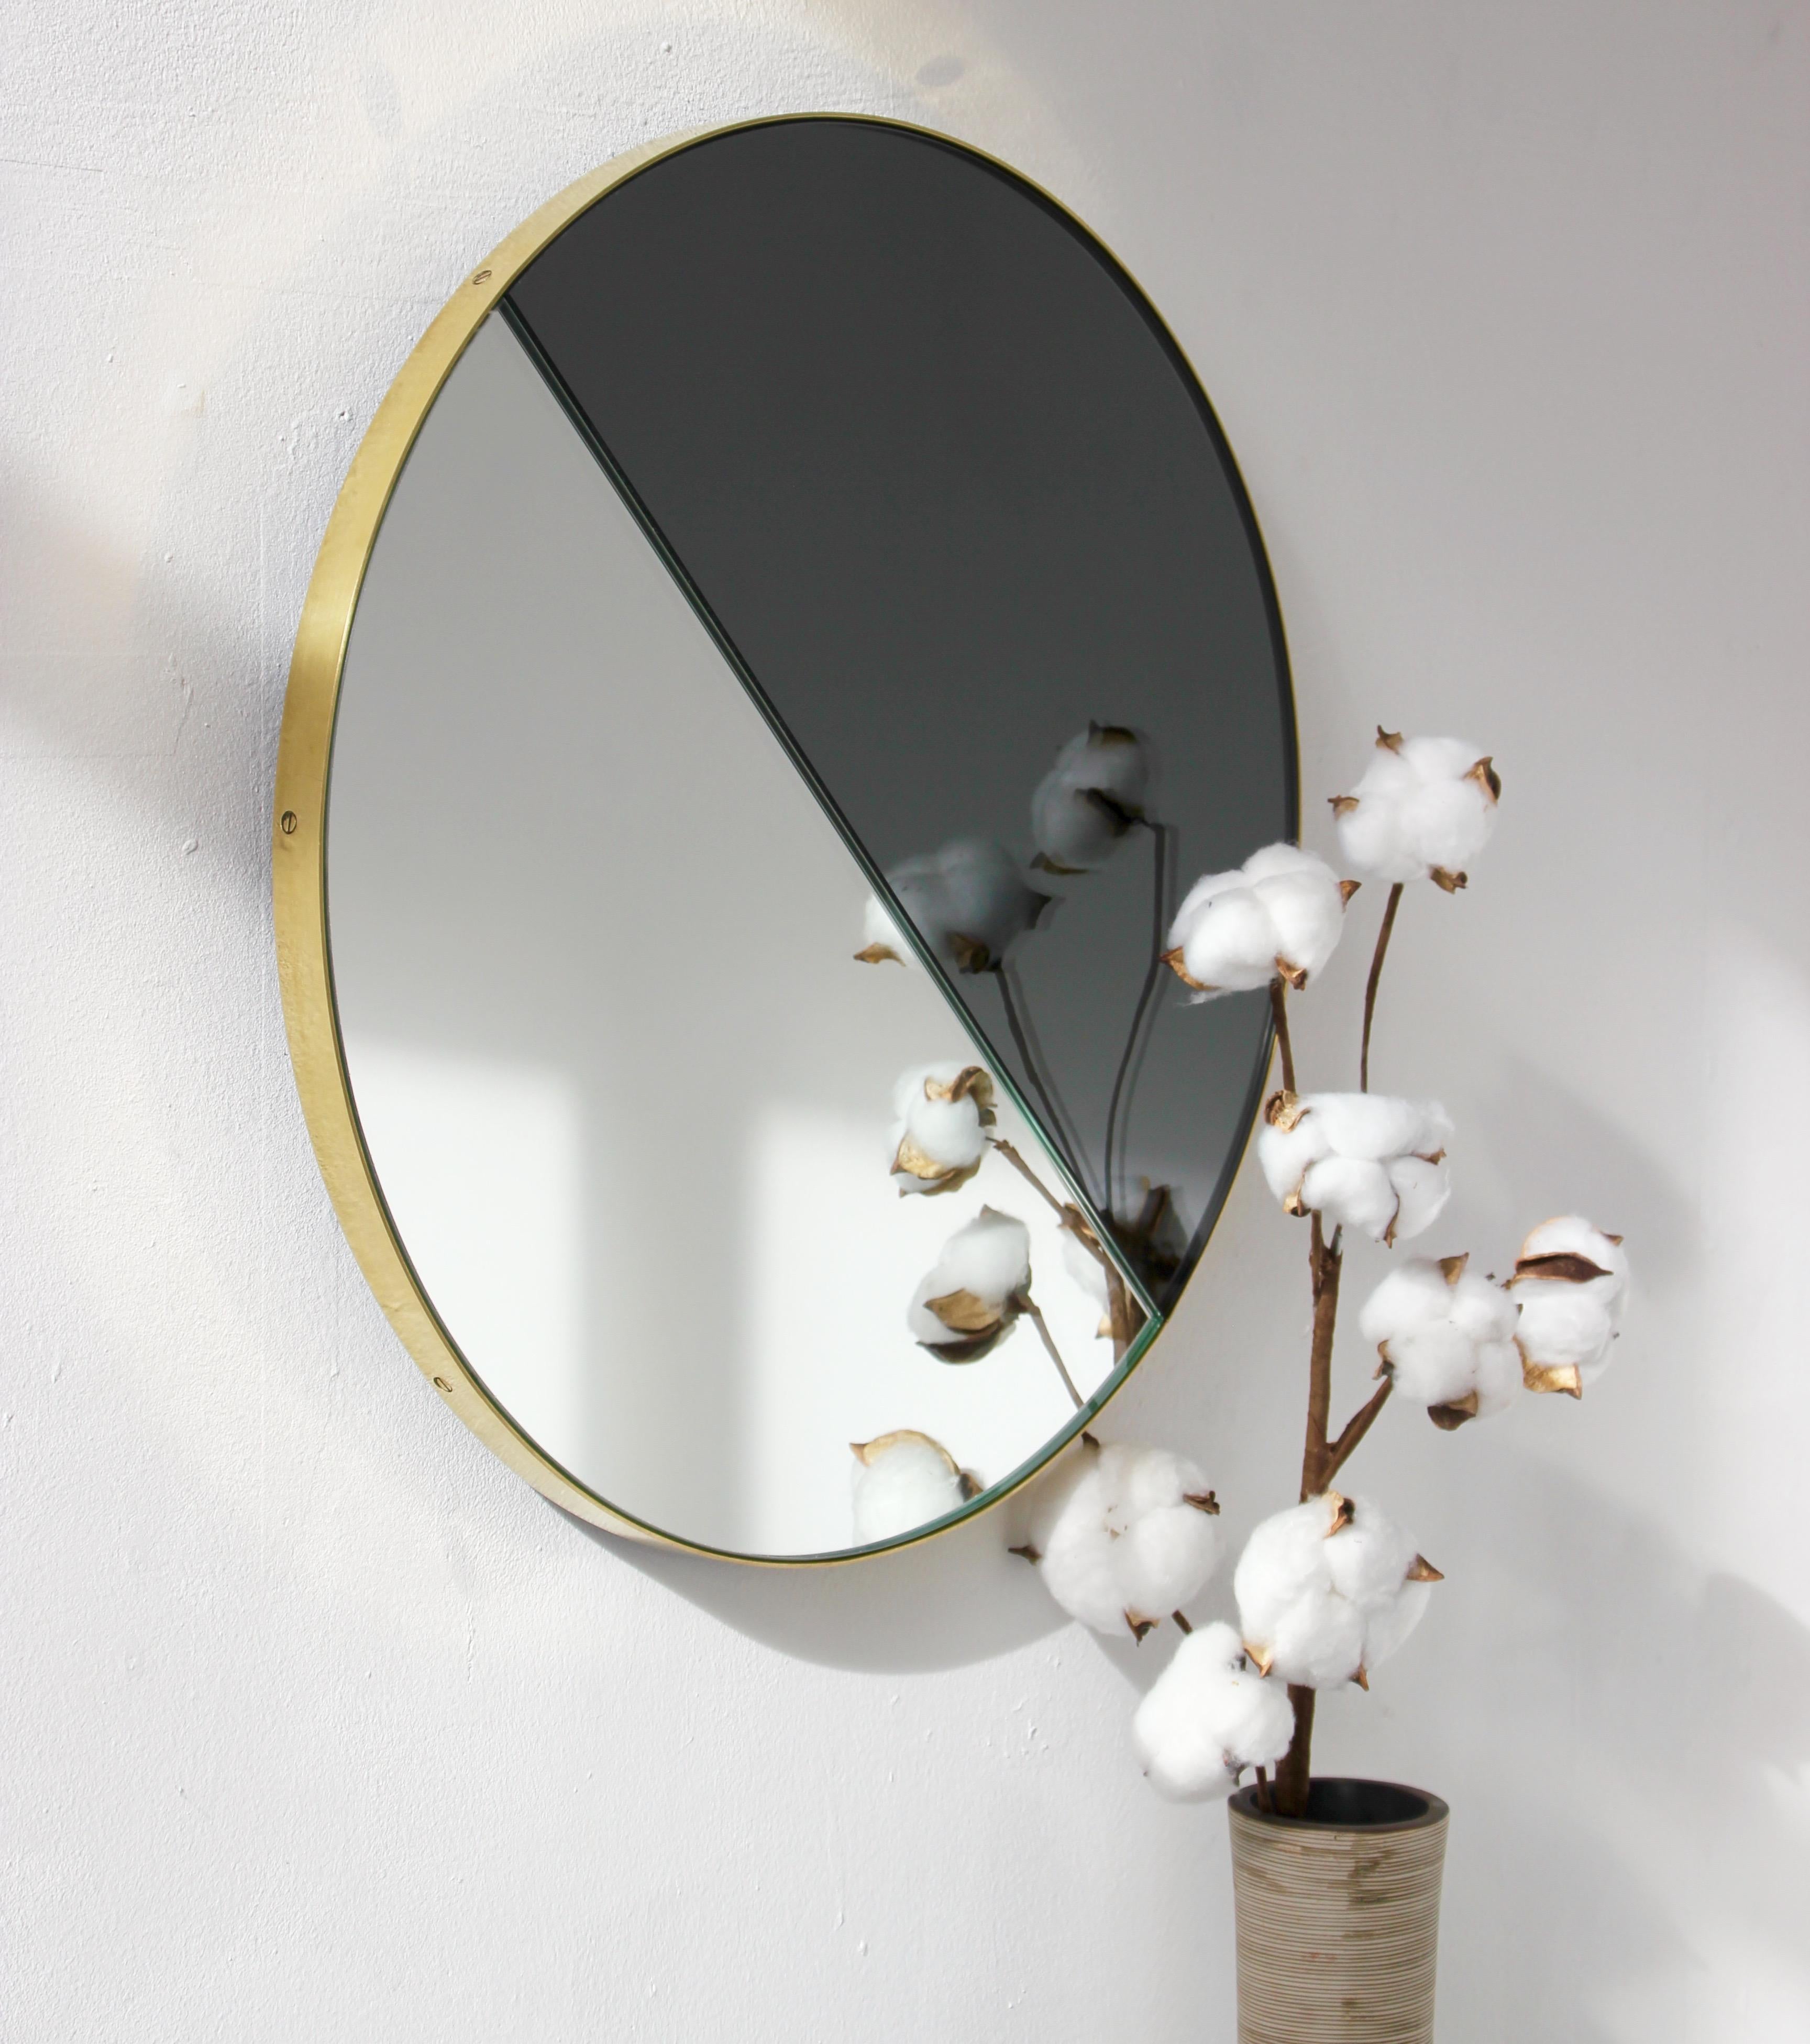 Contemporary mixed black and silver mirror tints Dualis Orbis with a brushed brass frame. Fitted with a quality hanging system that allows a flexible installation in 6 different positions (see pictures for reference). Designed and made in London,